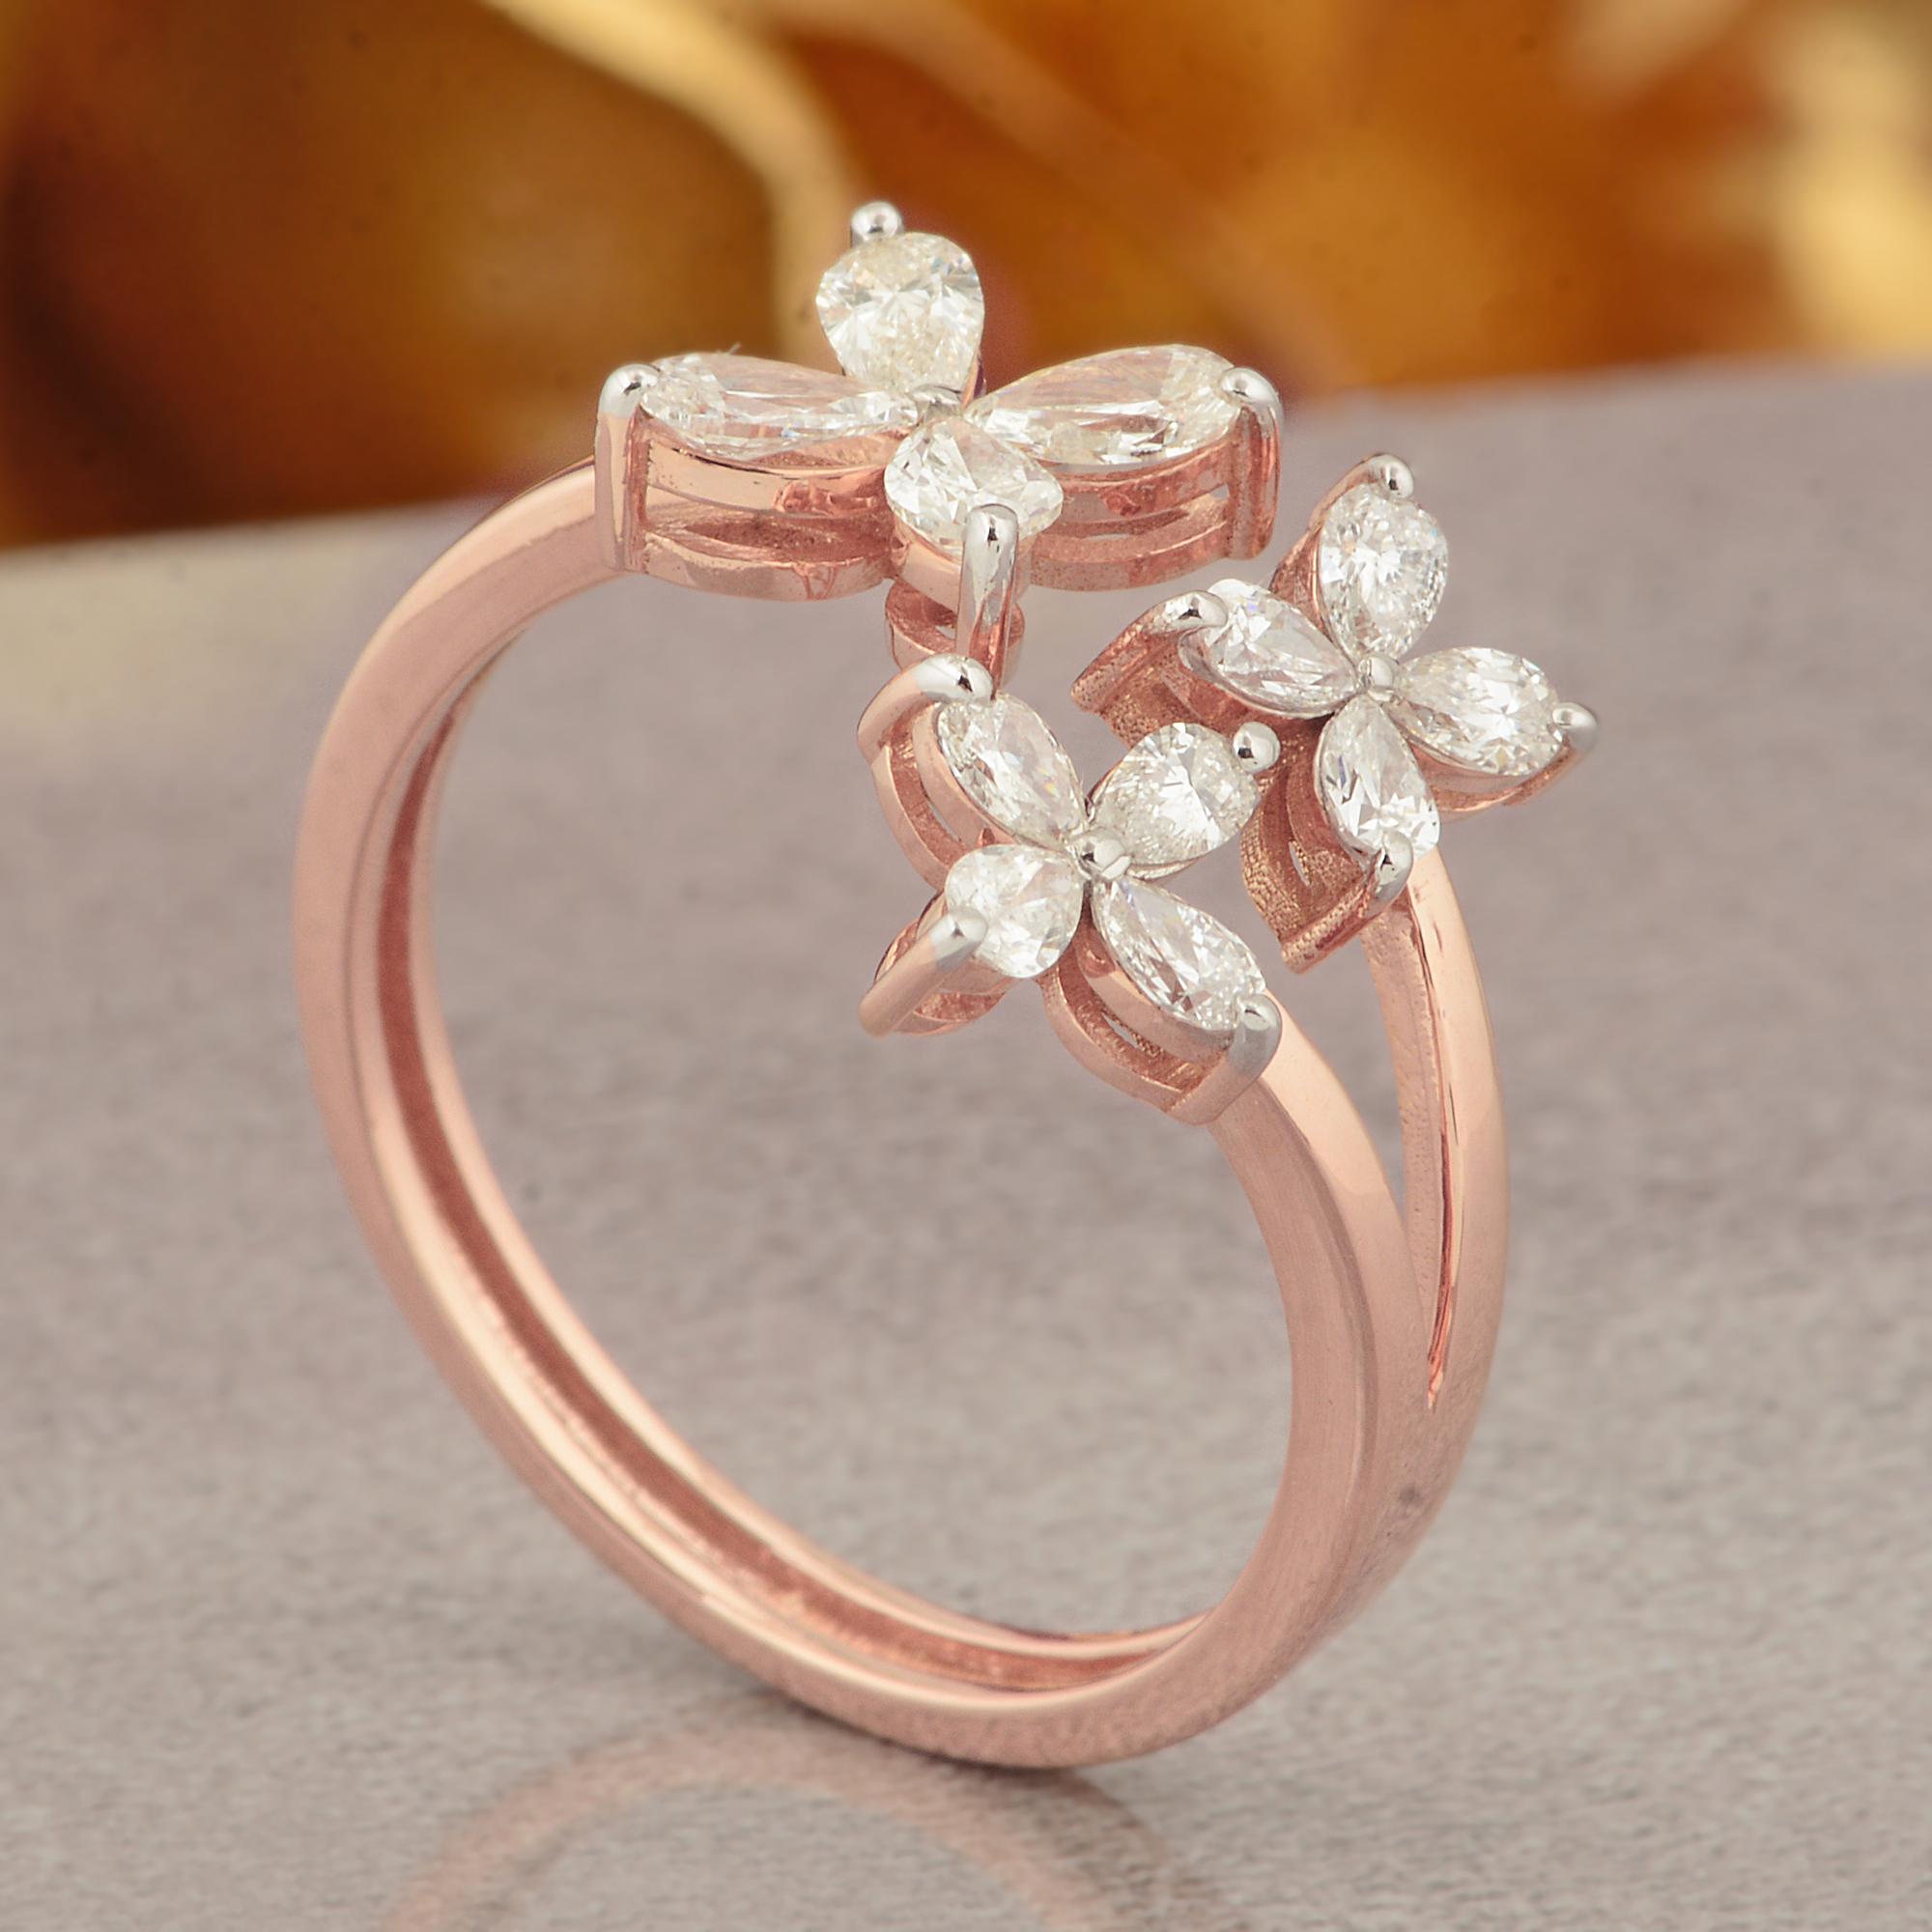 For Sale:  0.68 Carat SI Clarity HI Color Pear Diamond Flower Ring 18k Rose Gold Jewelry 4